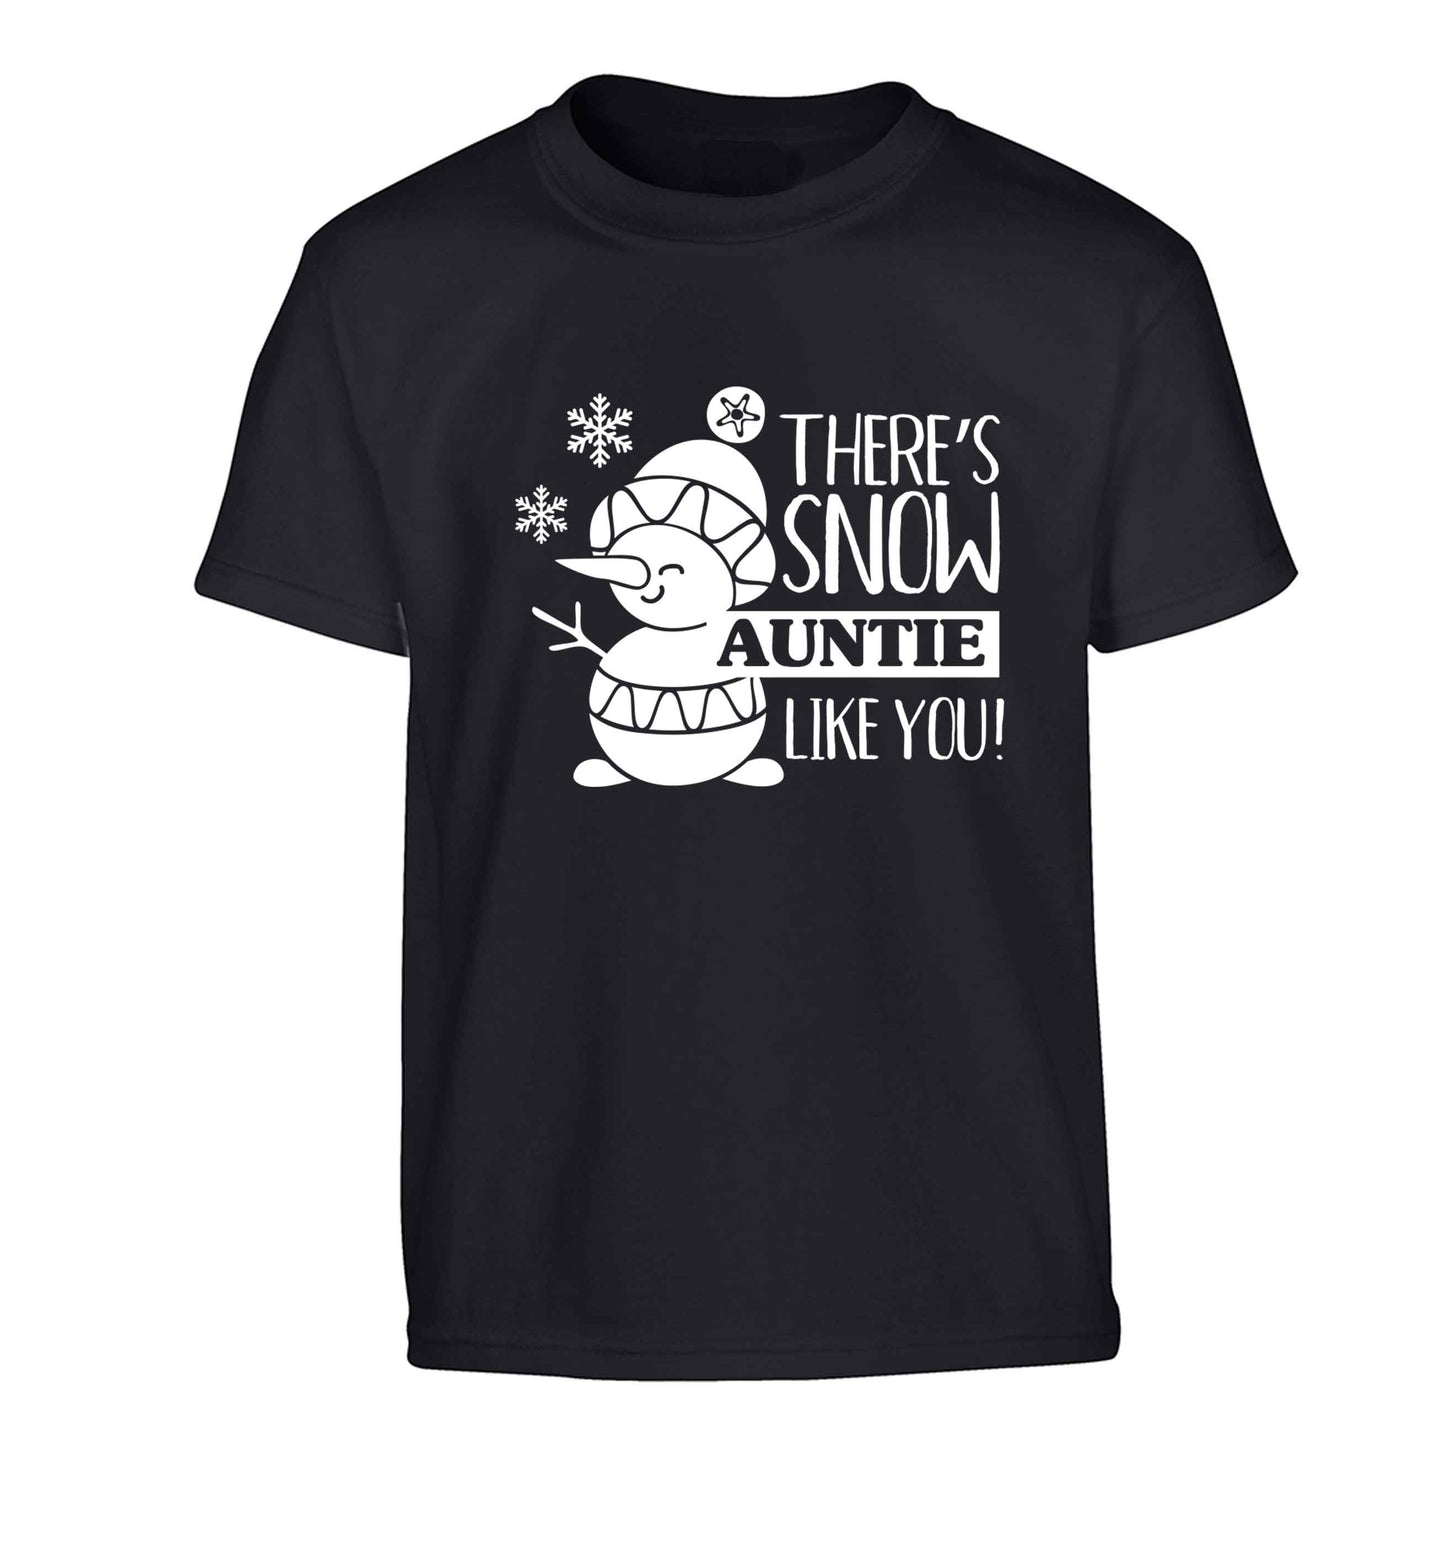 There's snow auntie like you Children's black Tshirt 12-13 Years